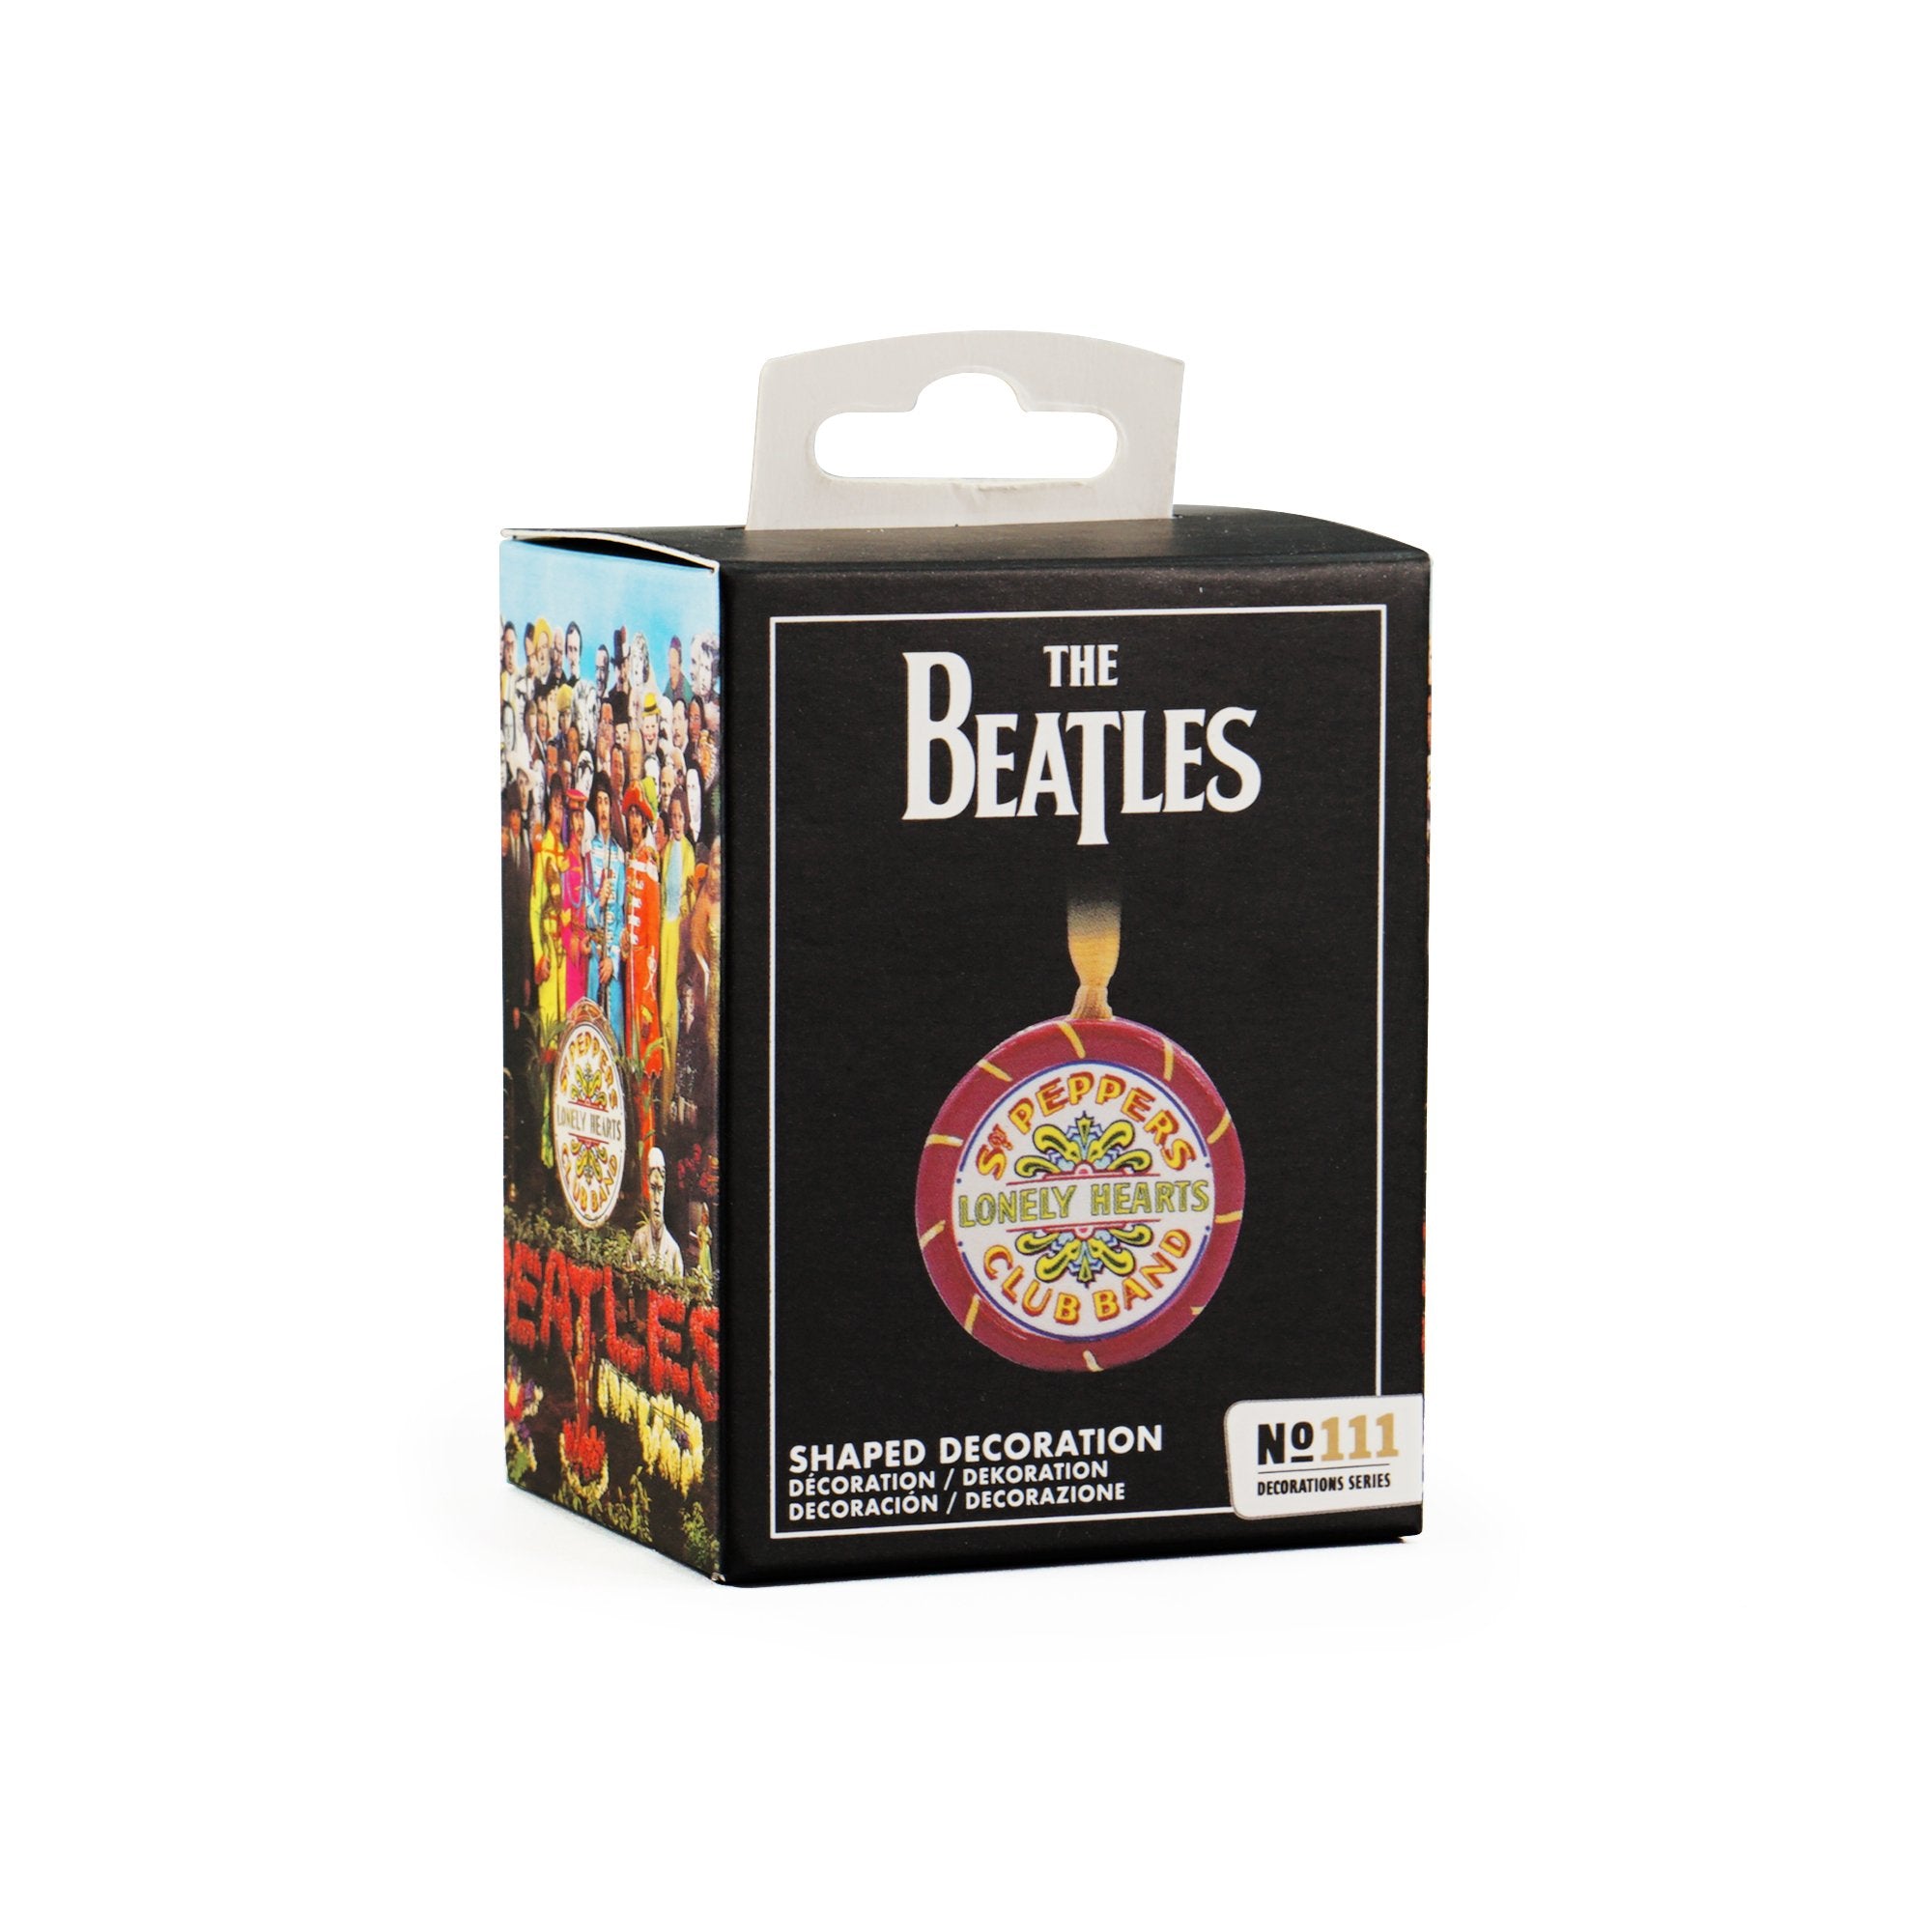 Hanging Decoration Boxed - The Beatles (Sgt. Pepper)